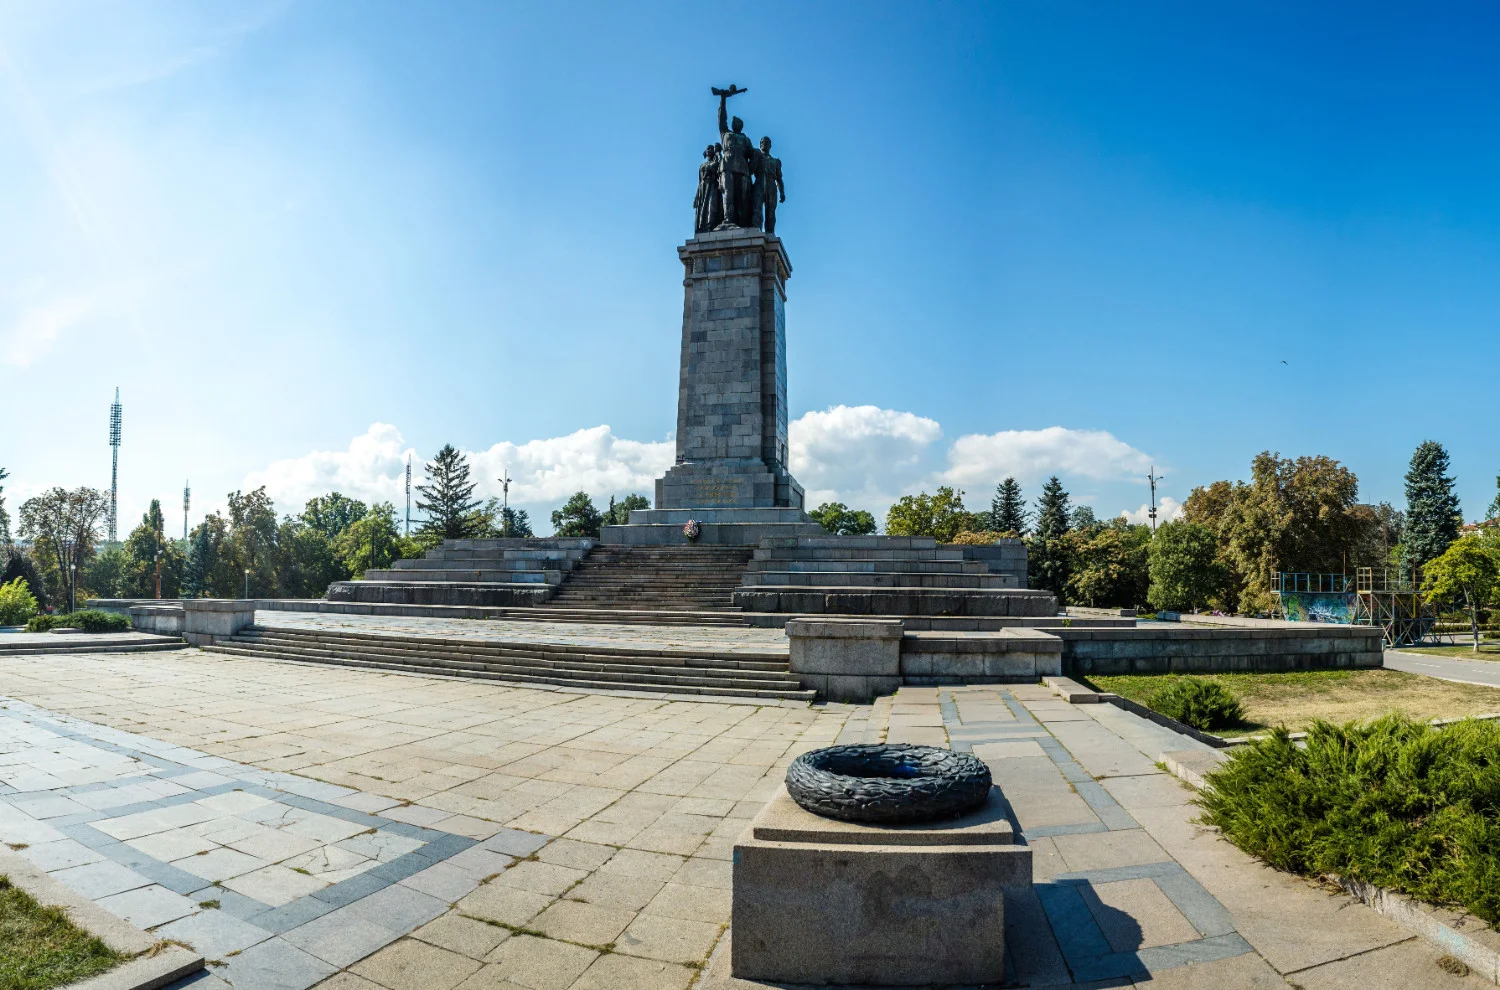 The Soviet Army Monument marks this challenging period in Bulgarian history through a monument as imposing as the forces that commissioned it.  